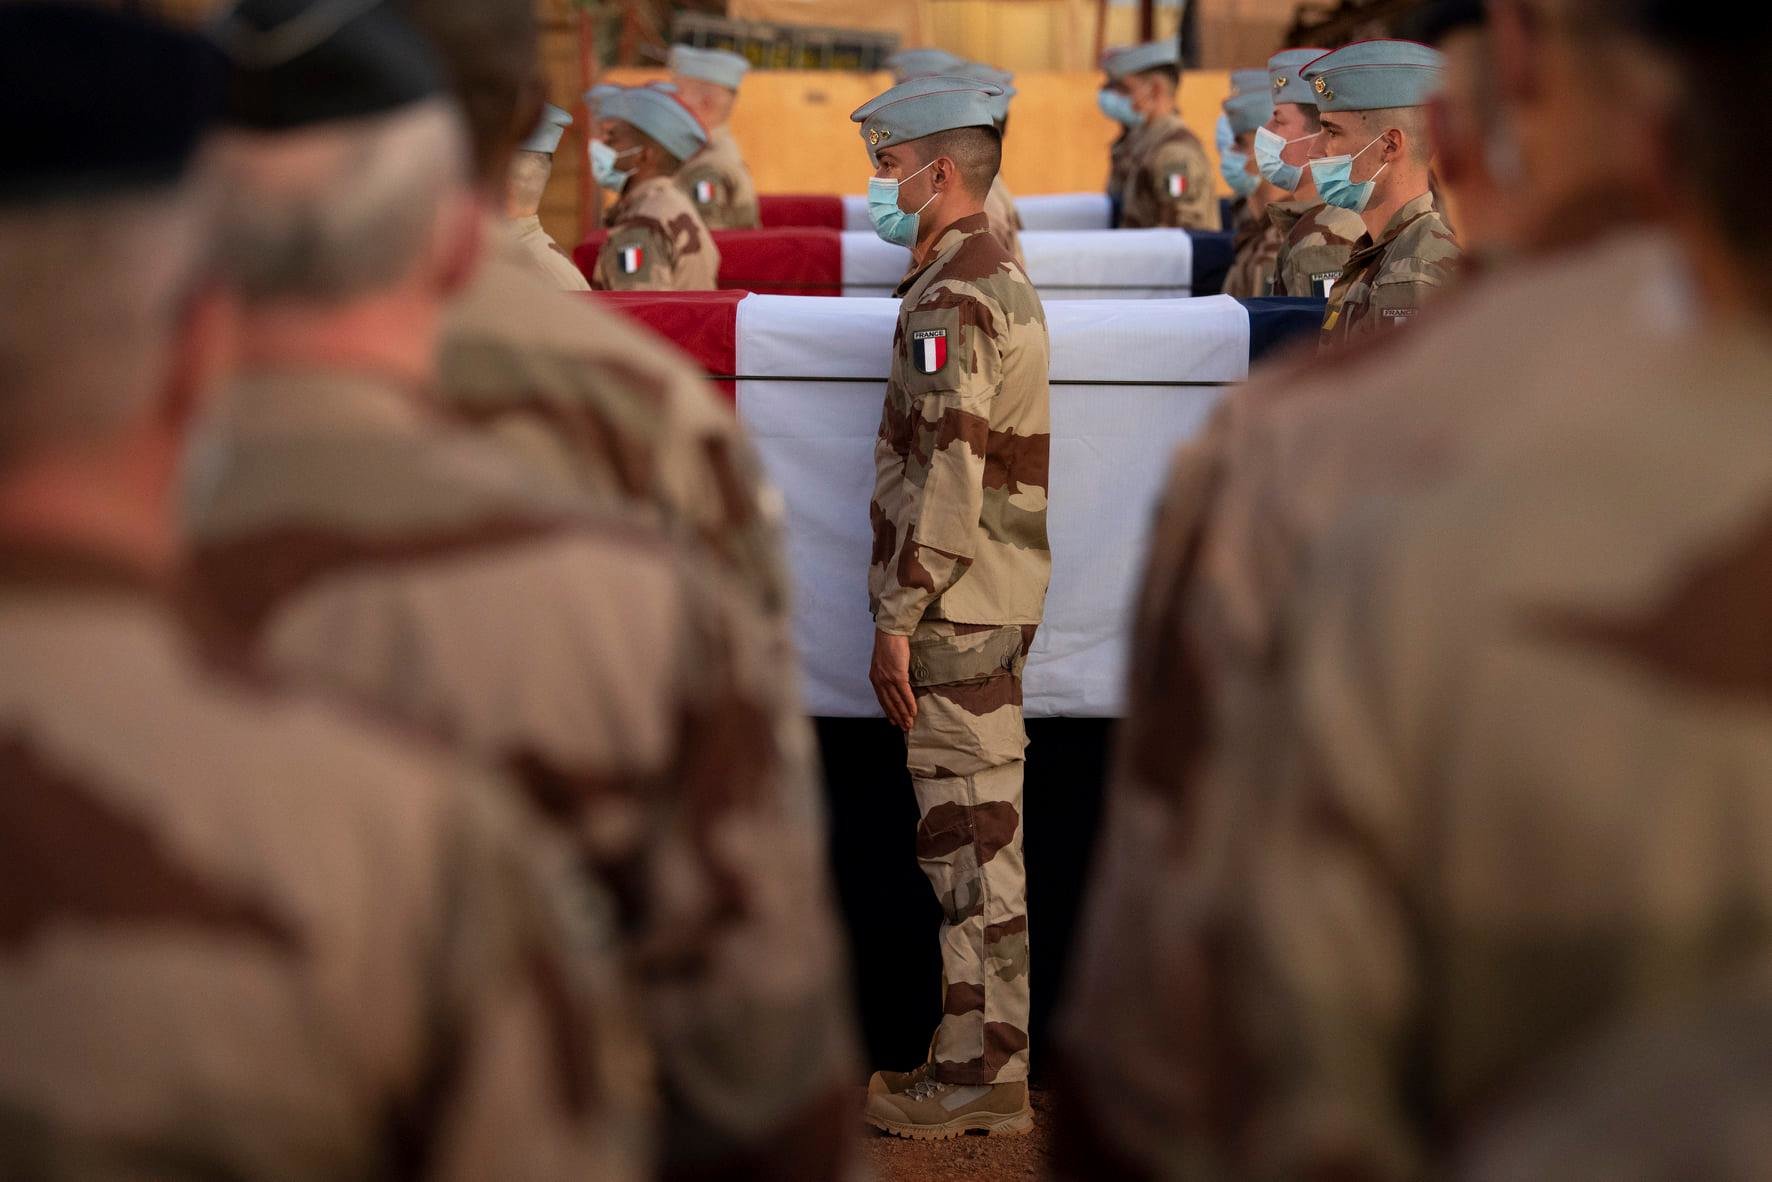 A memorial ceremony for French soldiers killed in Mali on Dec. 28. Photo by French Army via Twitter.